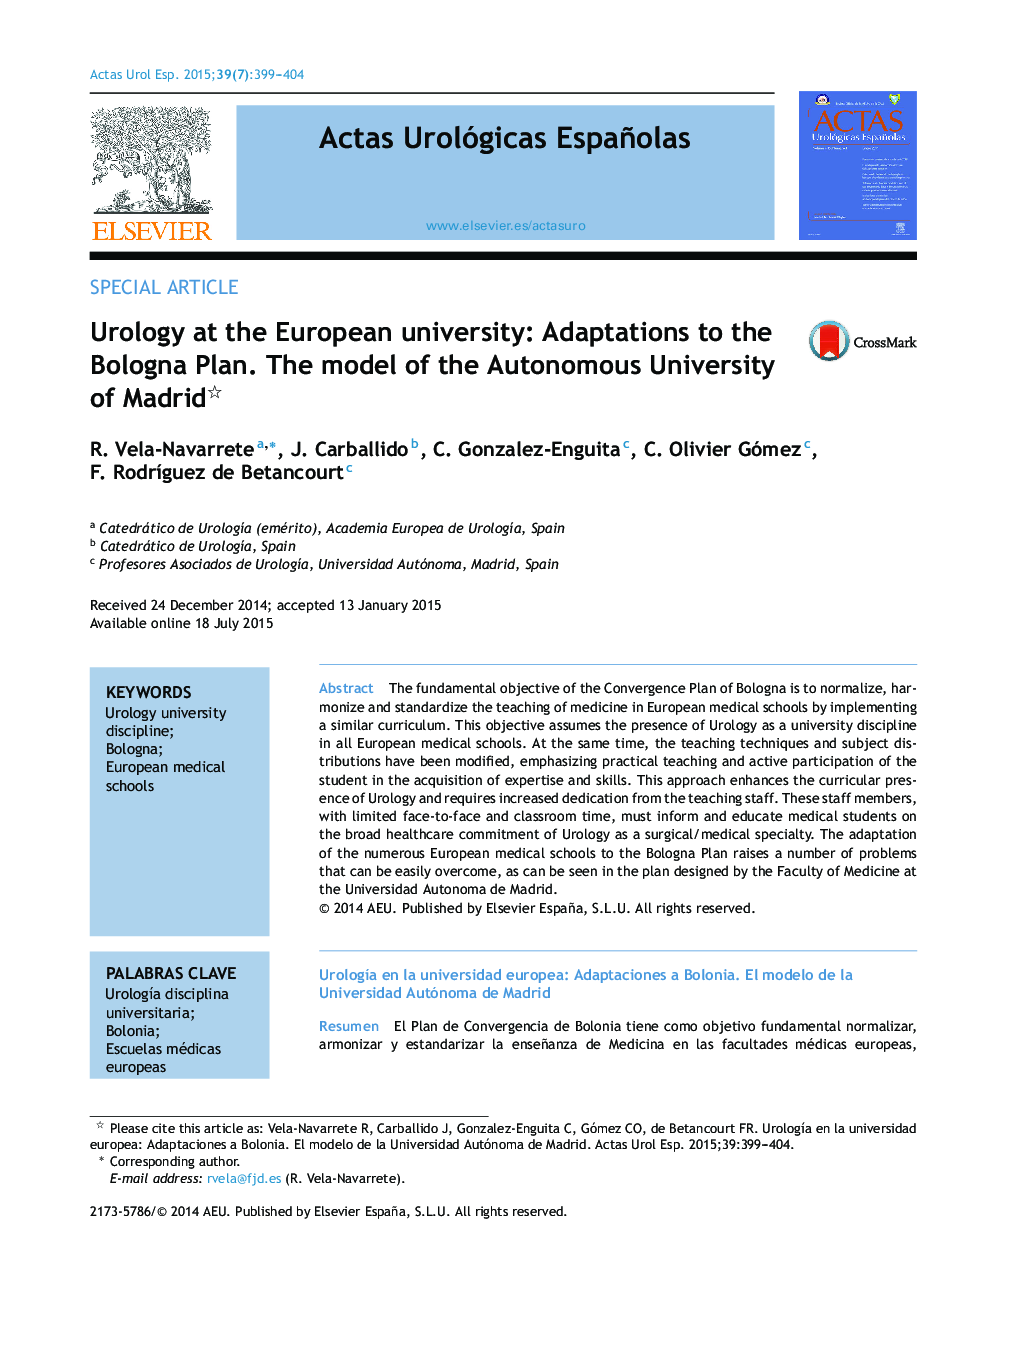 Urology at the European university: Adaptations to the Bologna Plan. The model of the Autonomous University of Madrid 